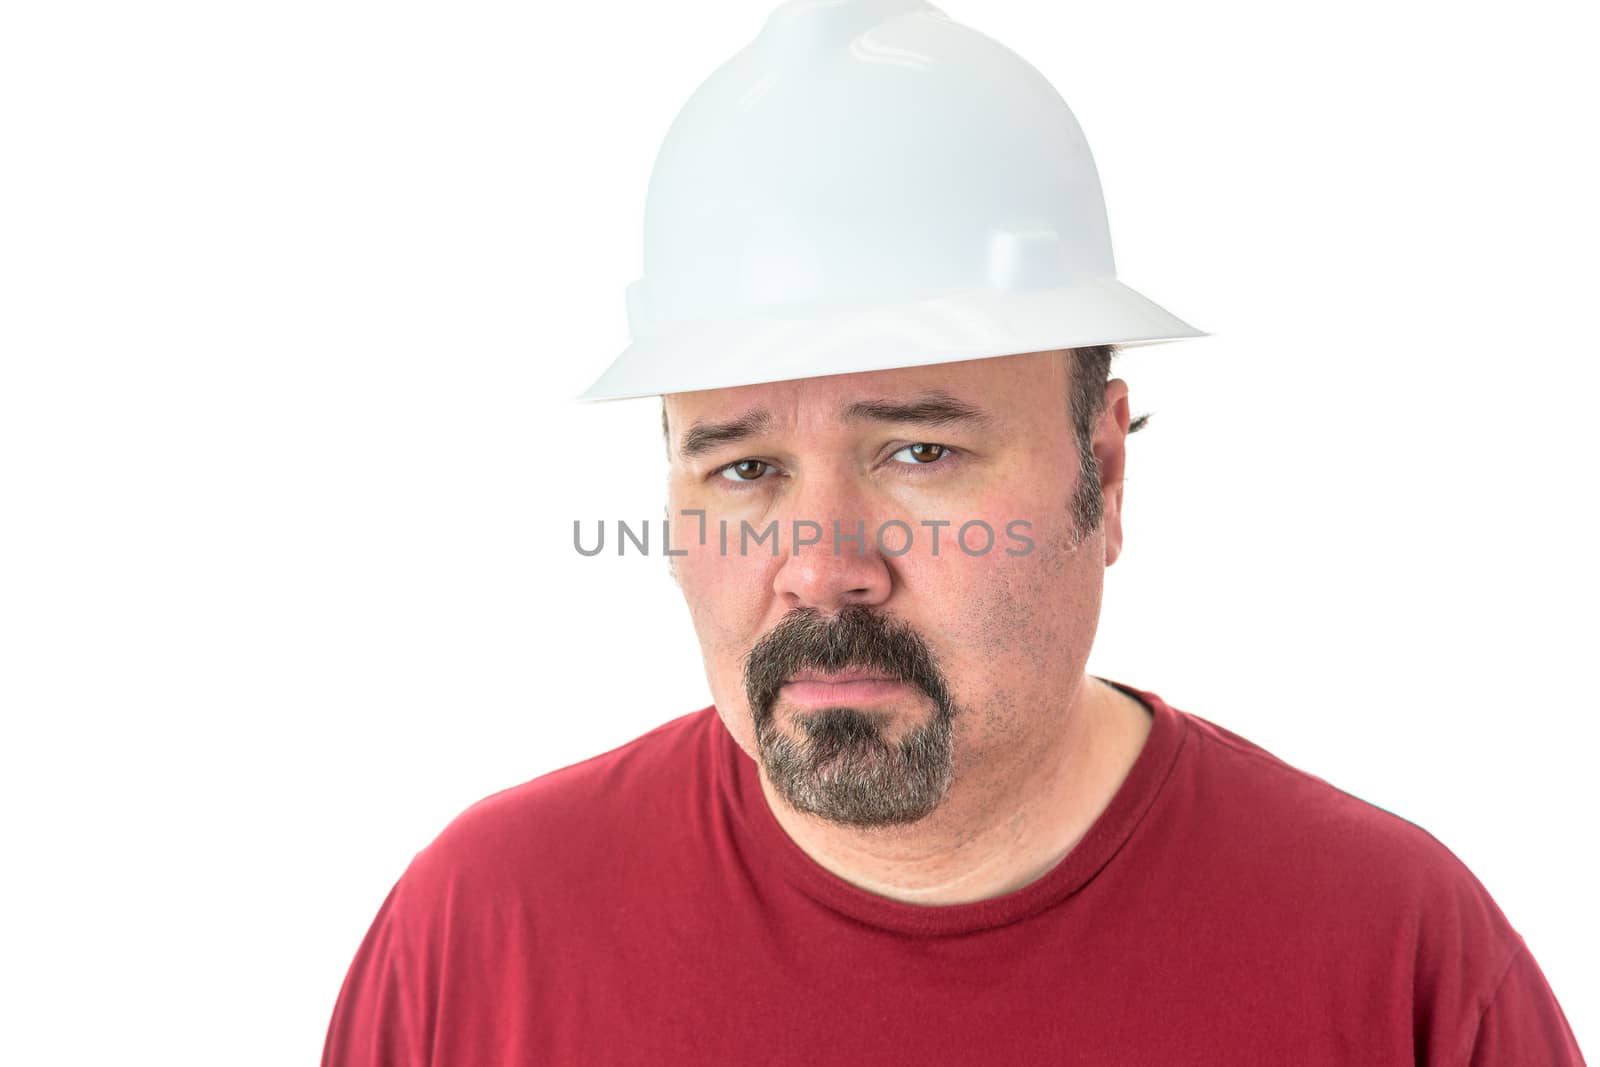 Thoughtful man wearing a hardhat staring at the camera with an uncertain analytical expression as he struggles to believe something that does not seem quite true, isolated on white